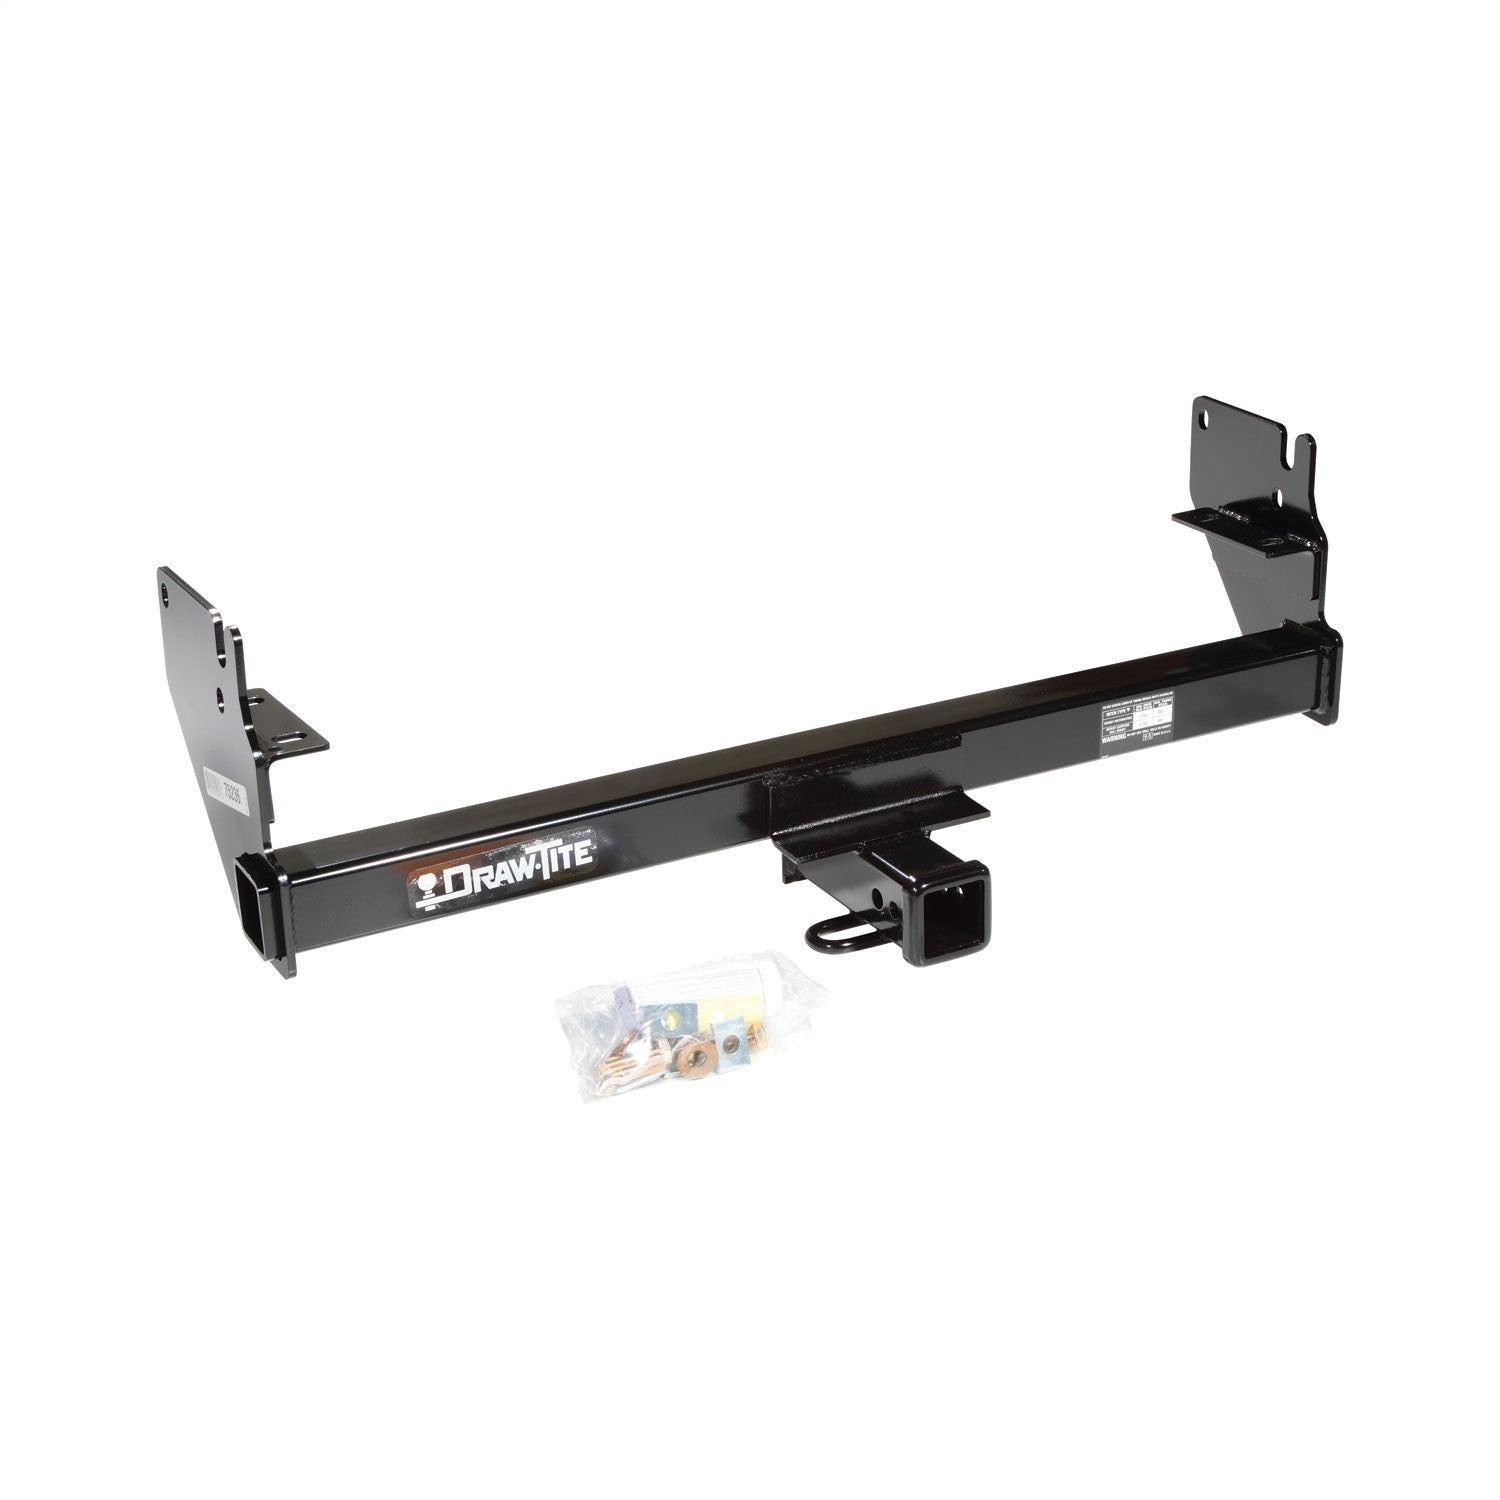 Draw-Tite 75236 Max-Frame Class III Trailer Hitch – TruckPoint